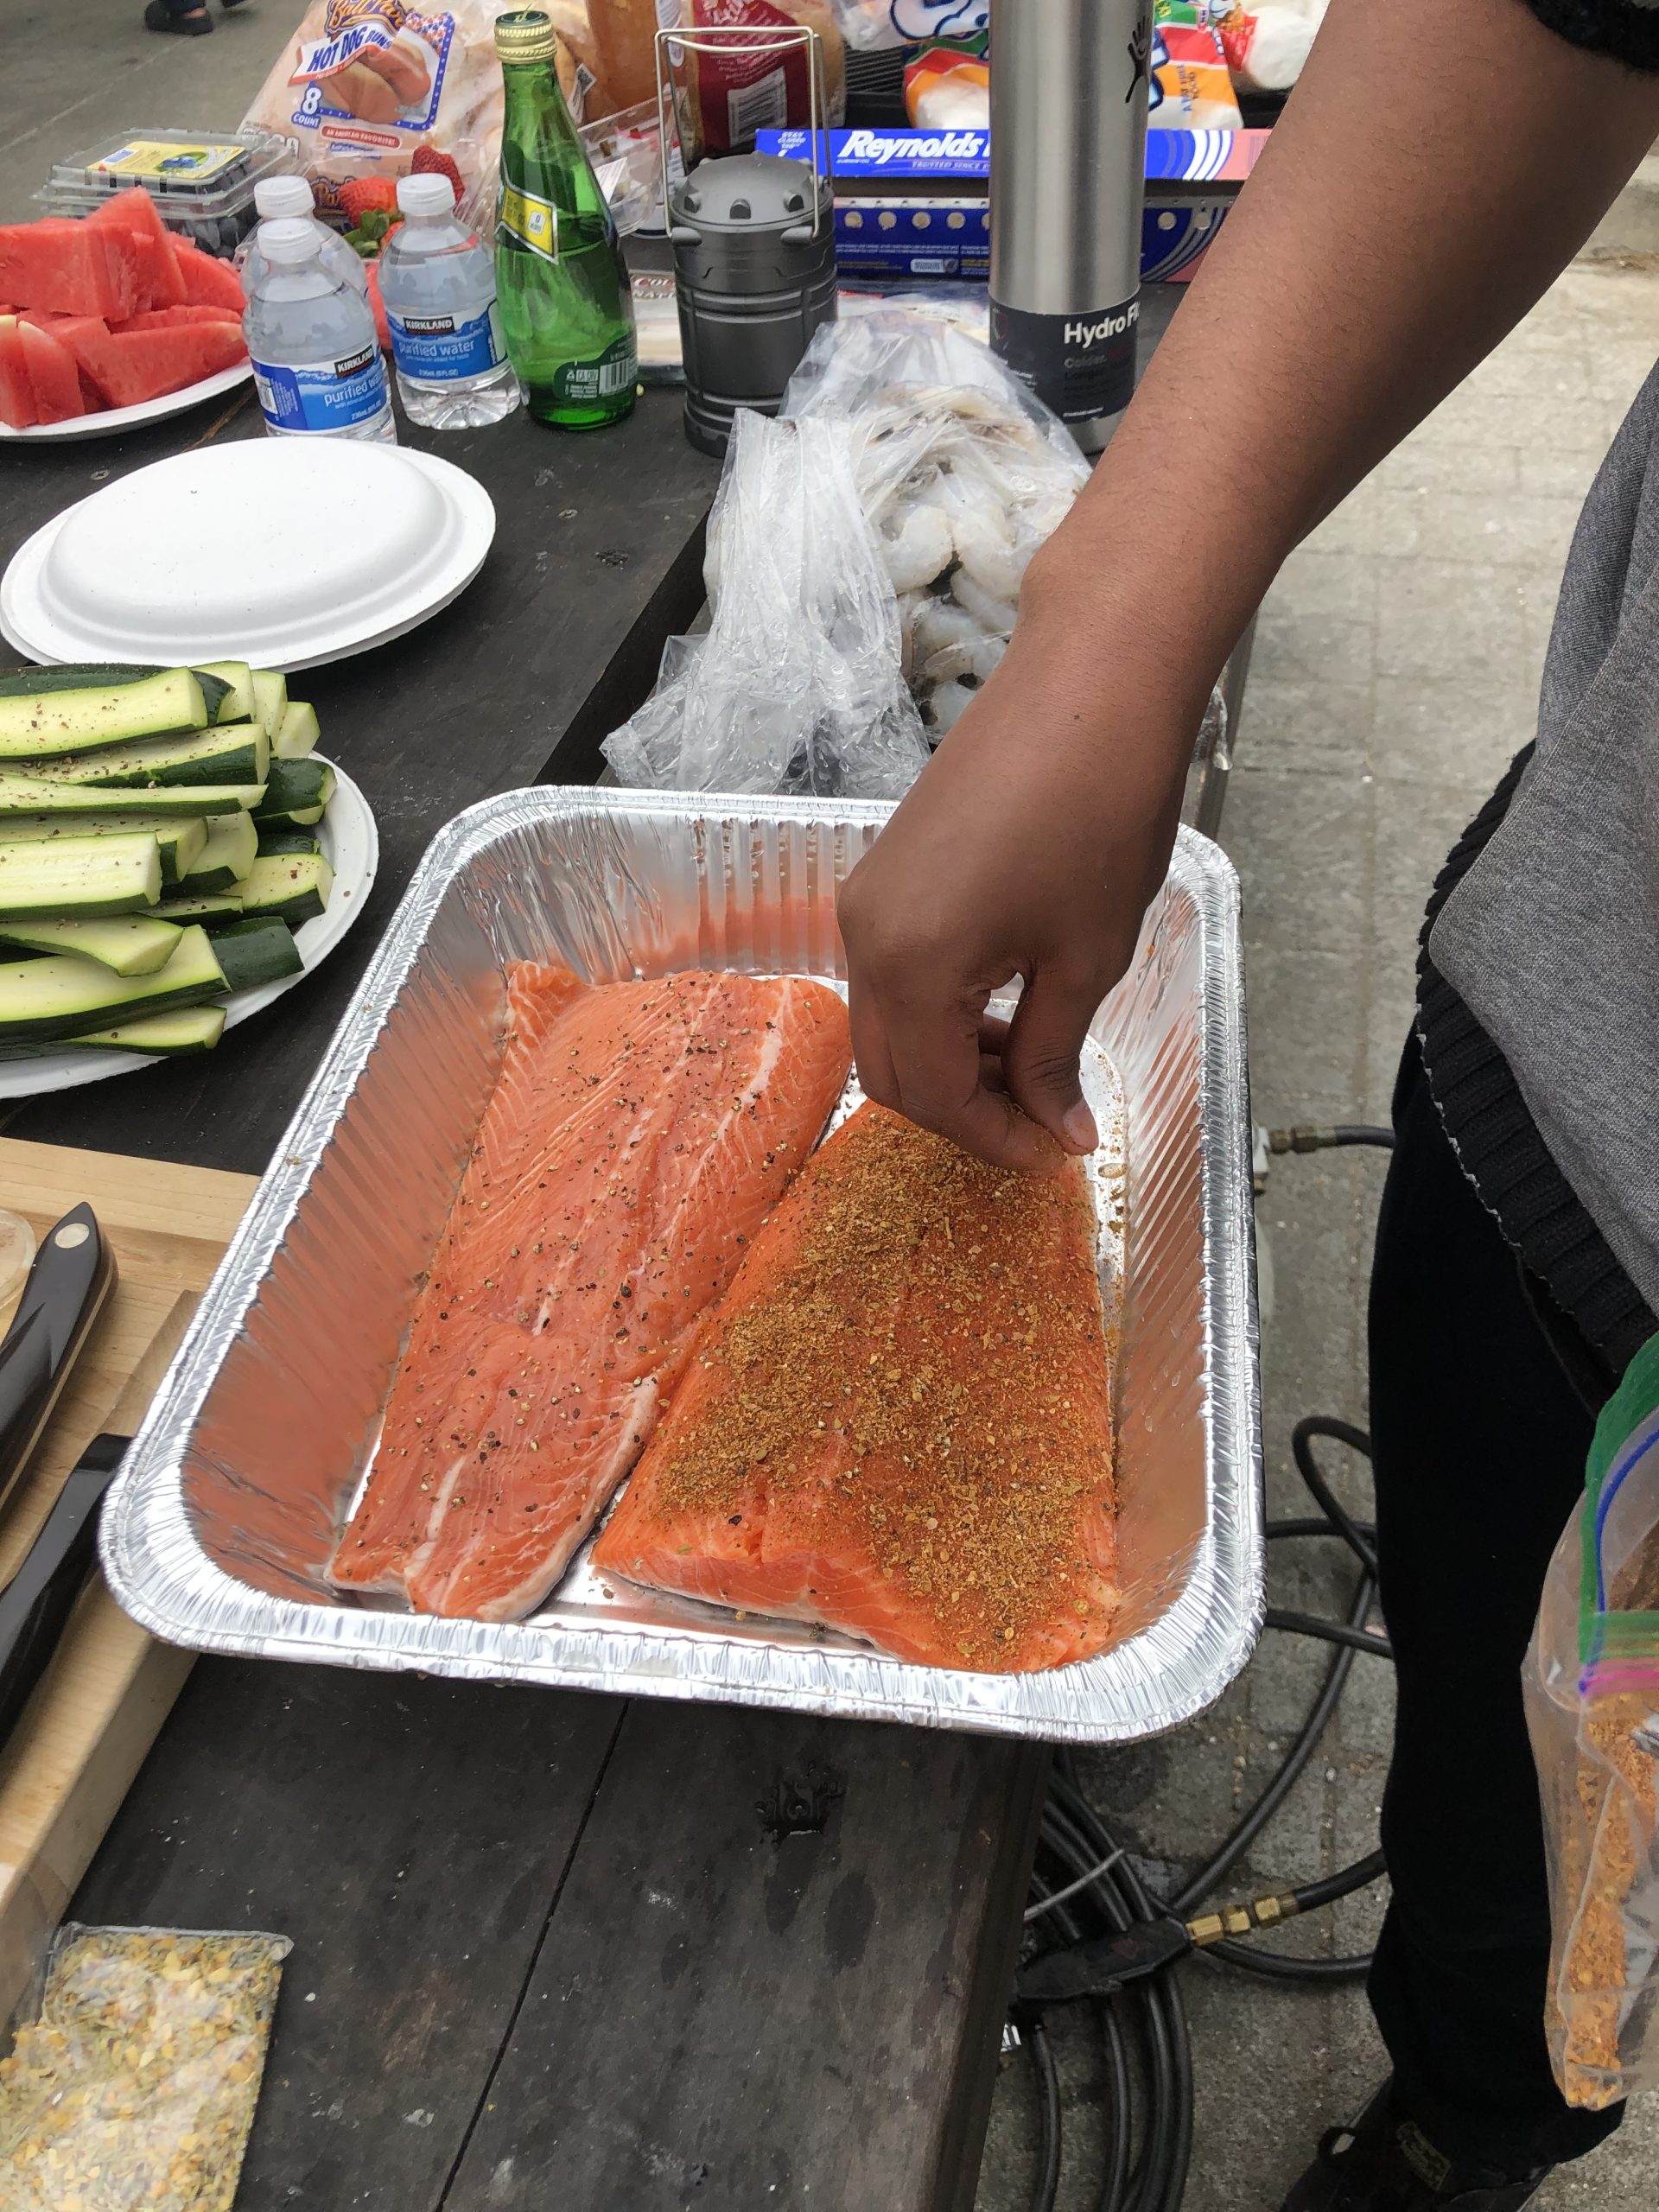 A person is putting seasoning on a piece of salmon.